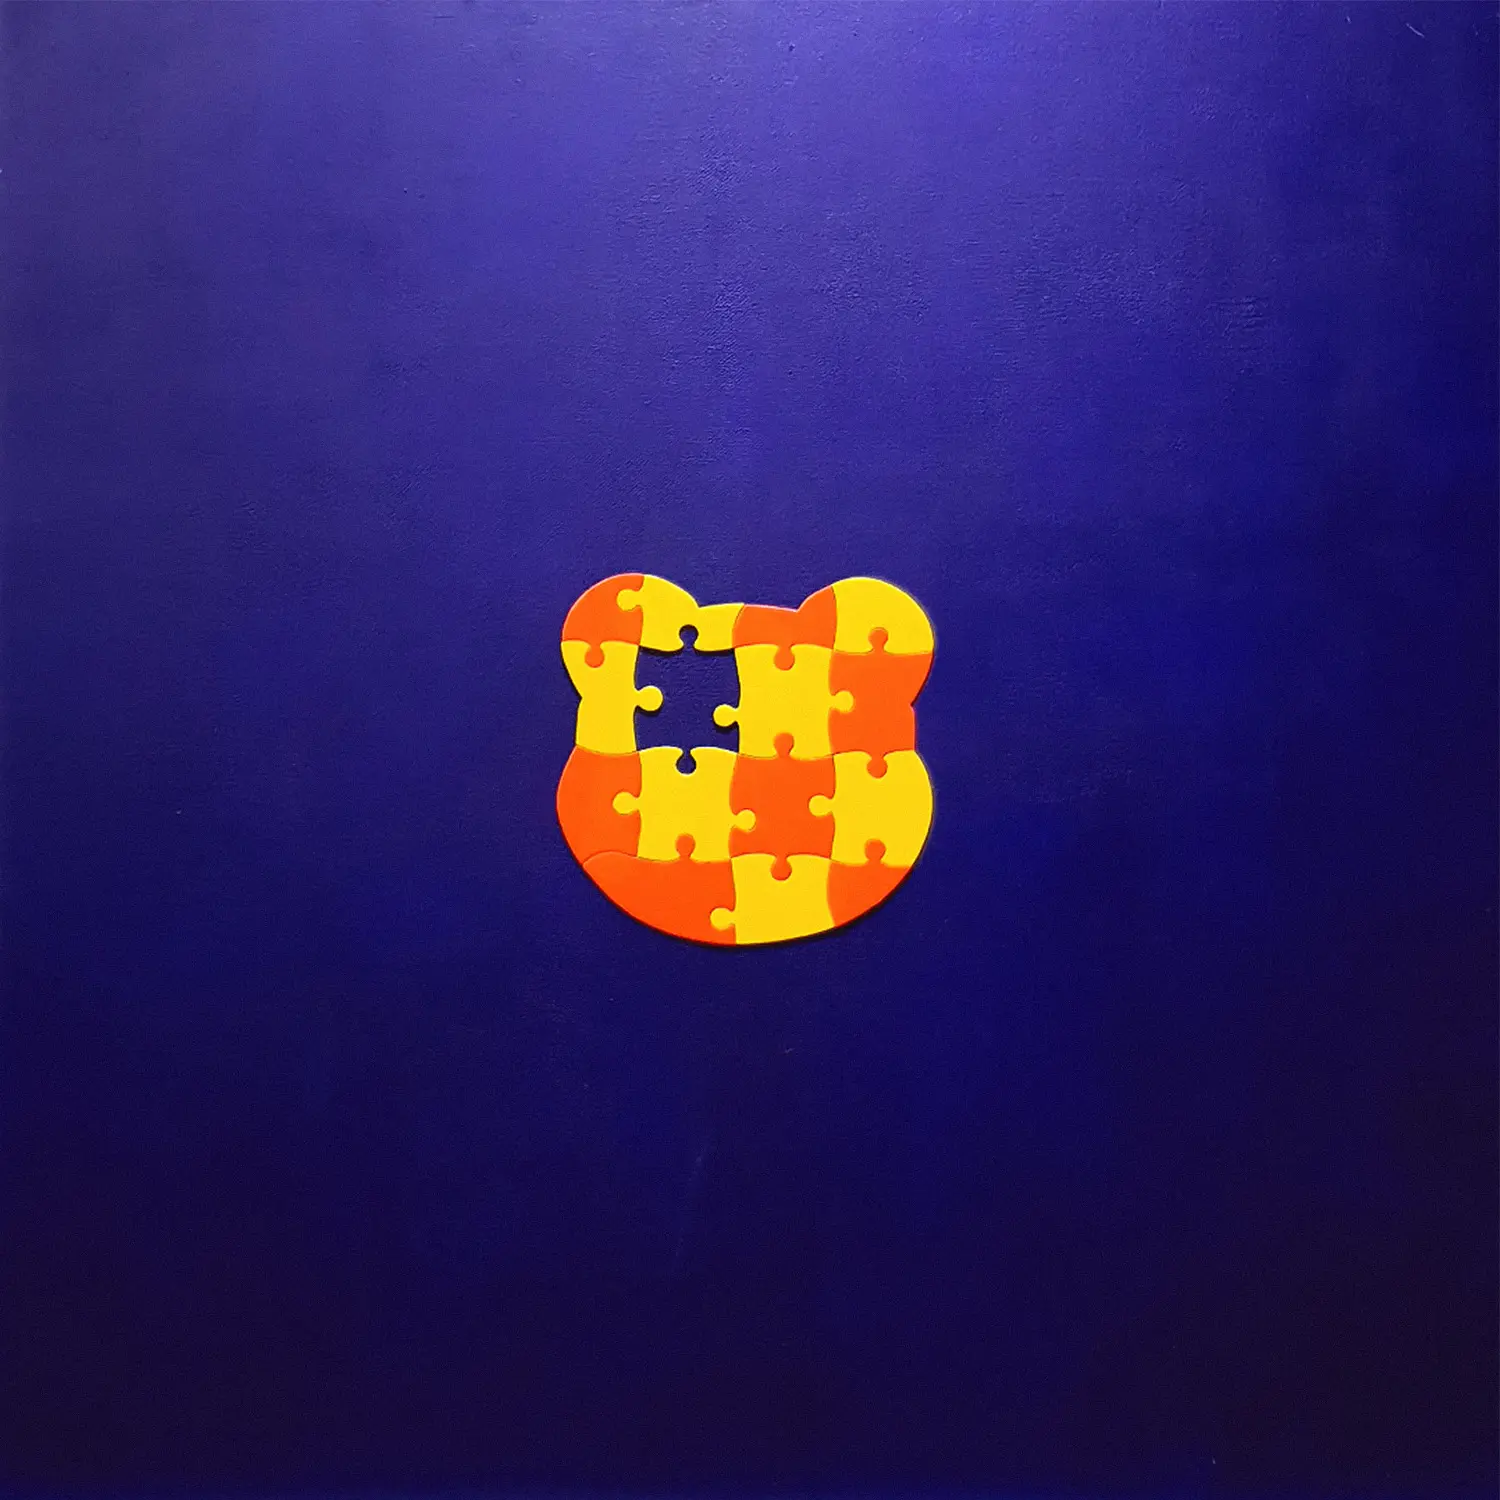 put the puzzle 'courage and freedom' on respect, 2022-purpleartist